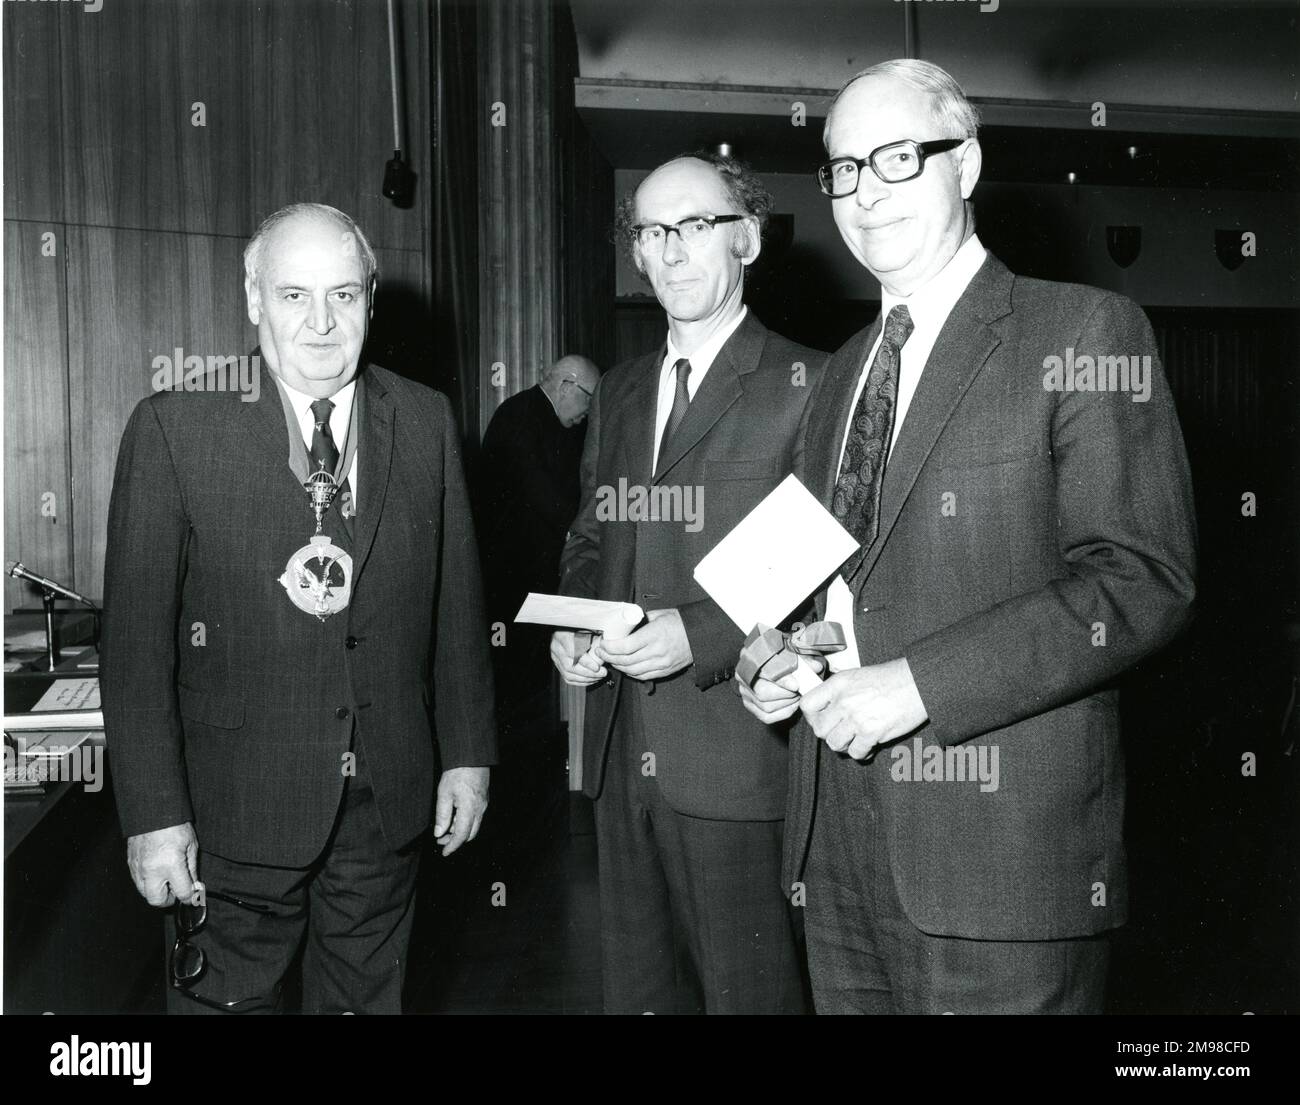 Charles Abell, OBE, FSLAET, CEng, FRAeS, 1910-1998, Royal Aeronautical Society President 1976-1977, left, presents the 1977 George Taylor (of Australia) Written Paper Prize on 12 May 1977 to A.C. Ham, centre, and A.J. ?Jack? Willshire, right, for their paper ?Advanced materials and their use in civil aircraft structures?. Jack worked in the Future Projects Office of British Aerospace at Hatfield. Stock Photo